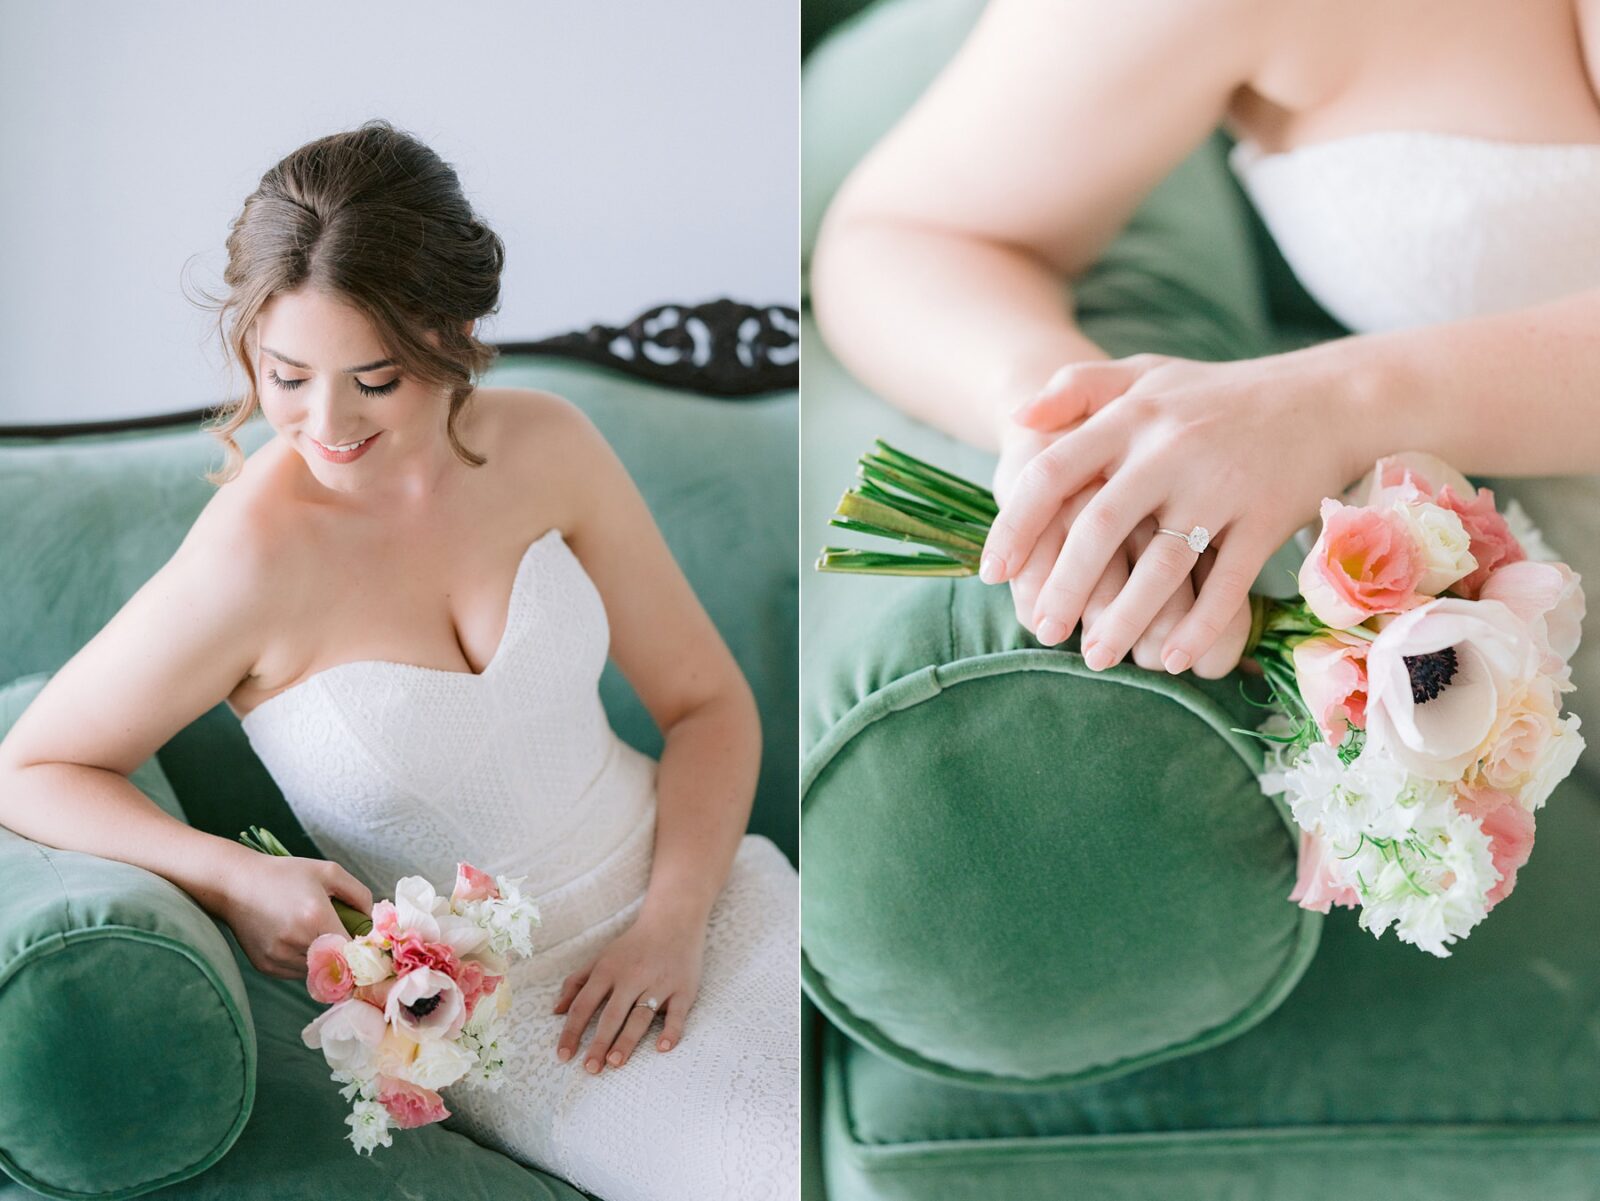 green couch at the videre, winter bridal session, bridal session, bride photography, the videre estate, hill country wedding venue, wimberley wedding venue, austin wedding photography, tara paige weddings, 